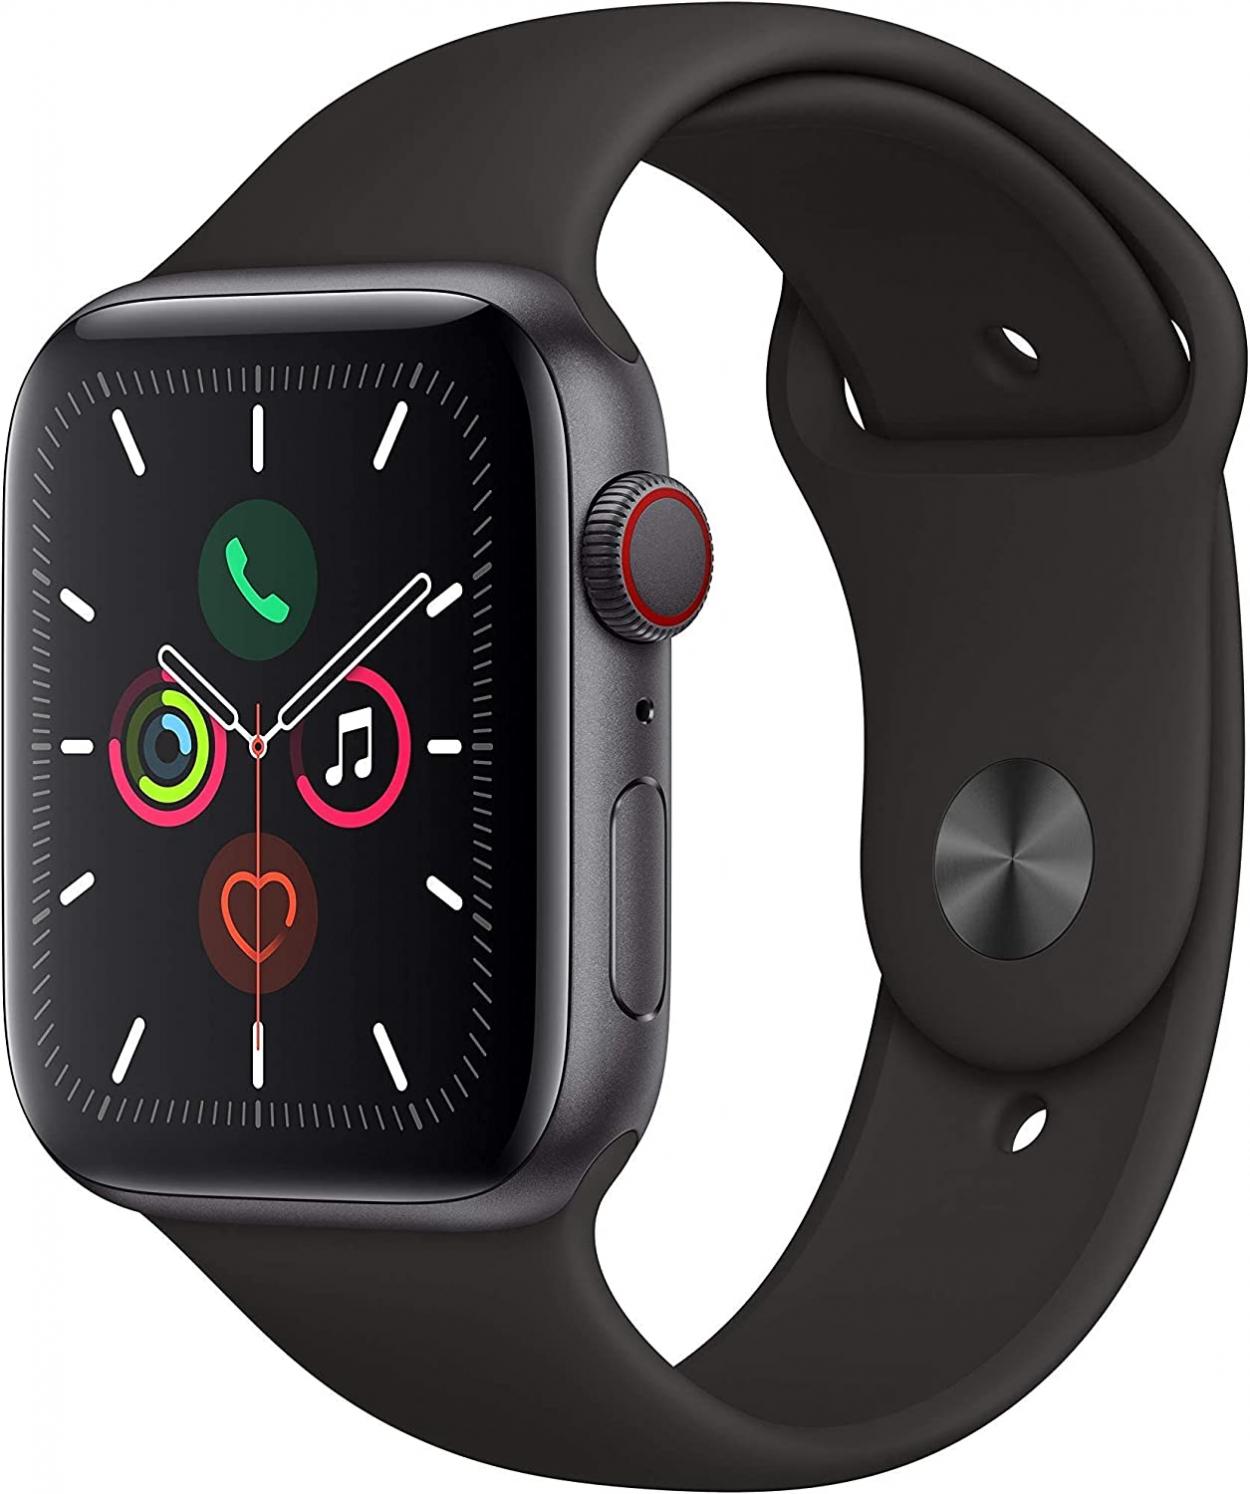 Apple Watch Series 5 (GPS + Cellular, 44MM) Space Gray Aluminum Case with Black Sport Band (Renewed)